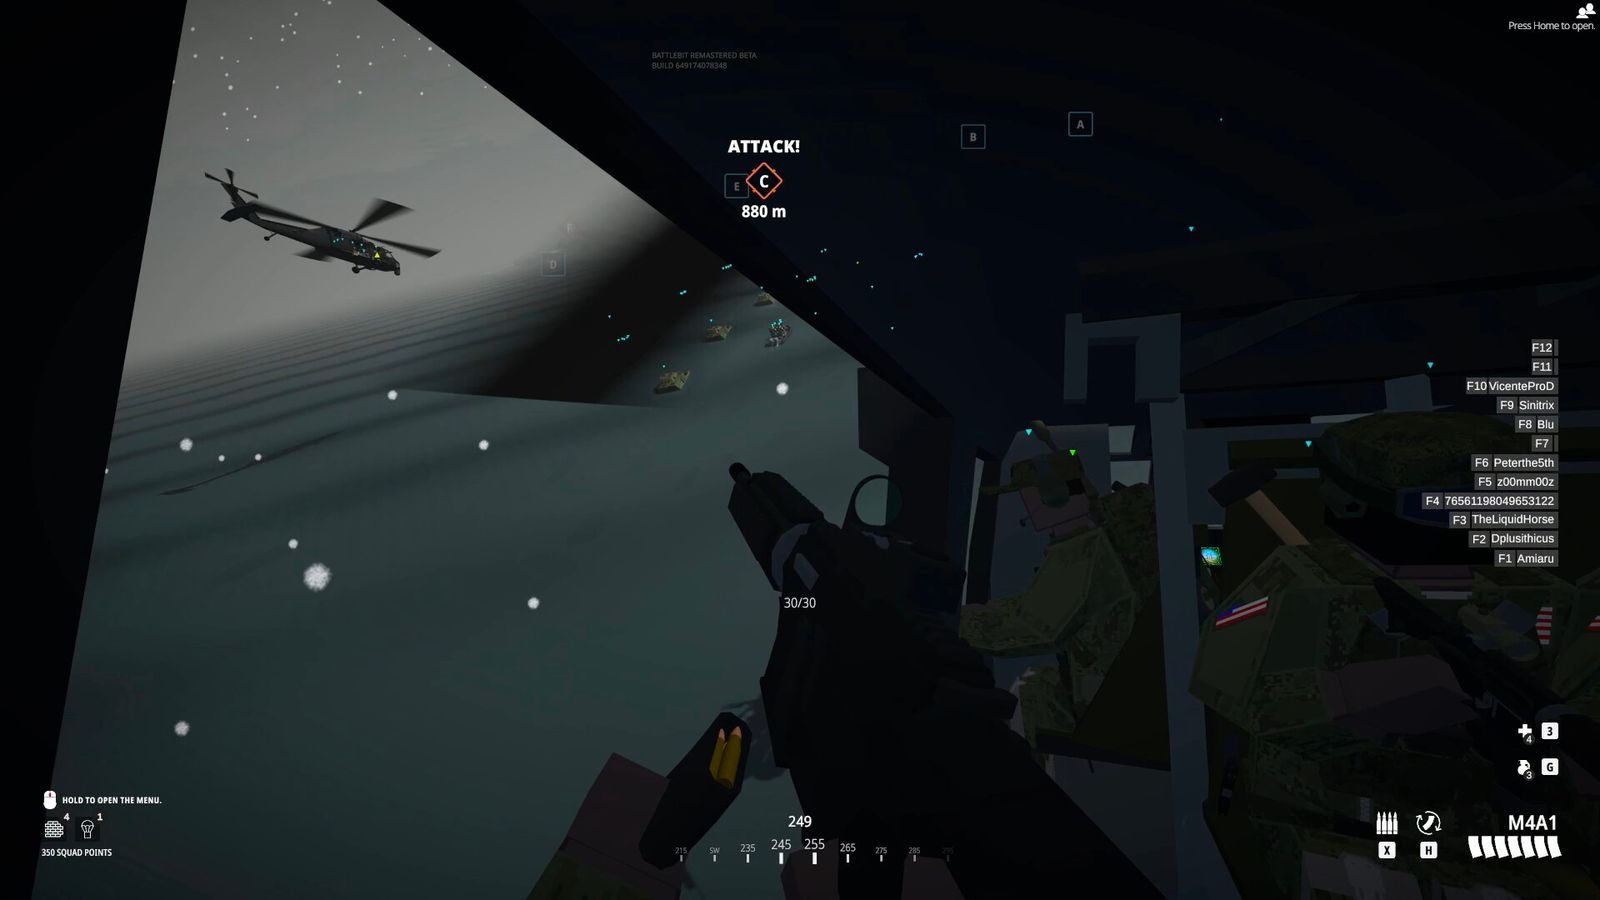 The player character sat in a helicopter, pointing a gun in Battlebit.